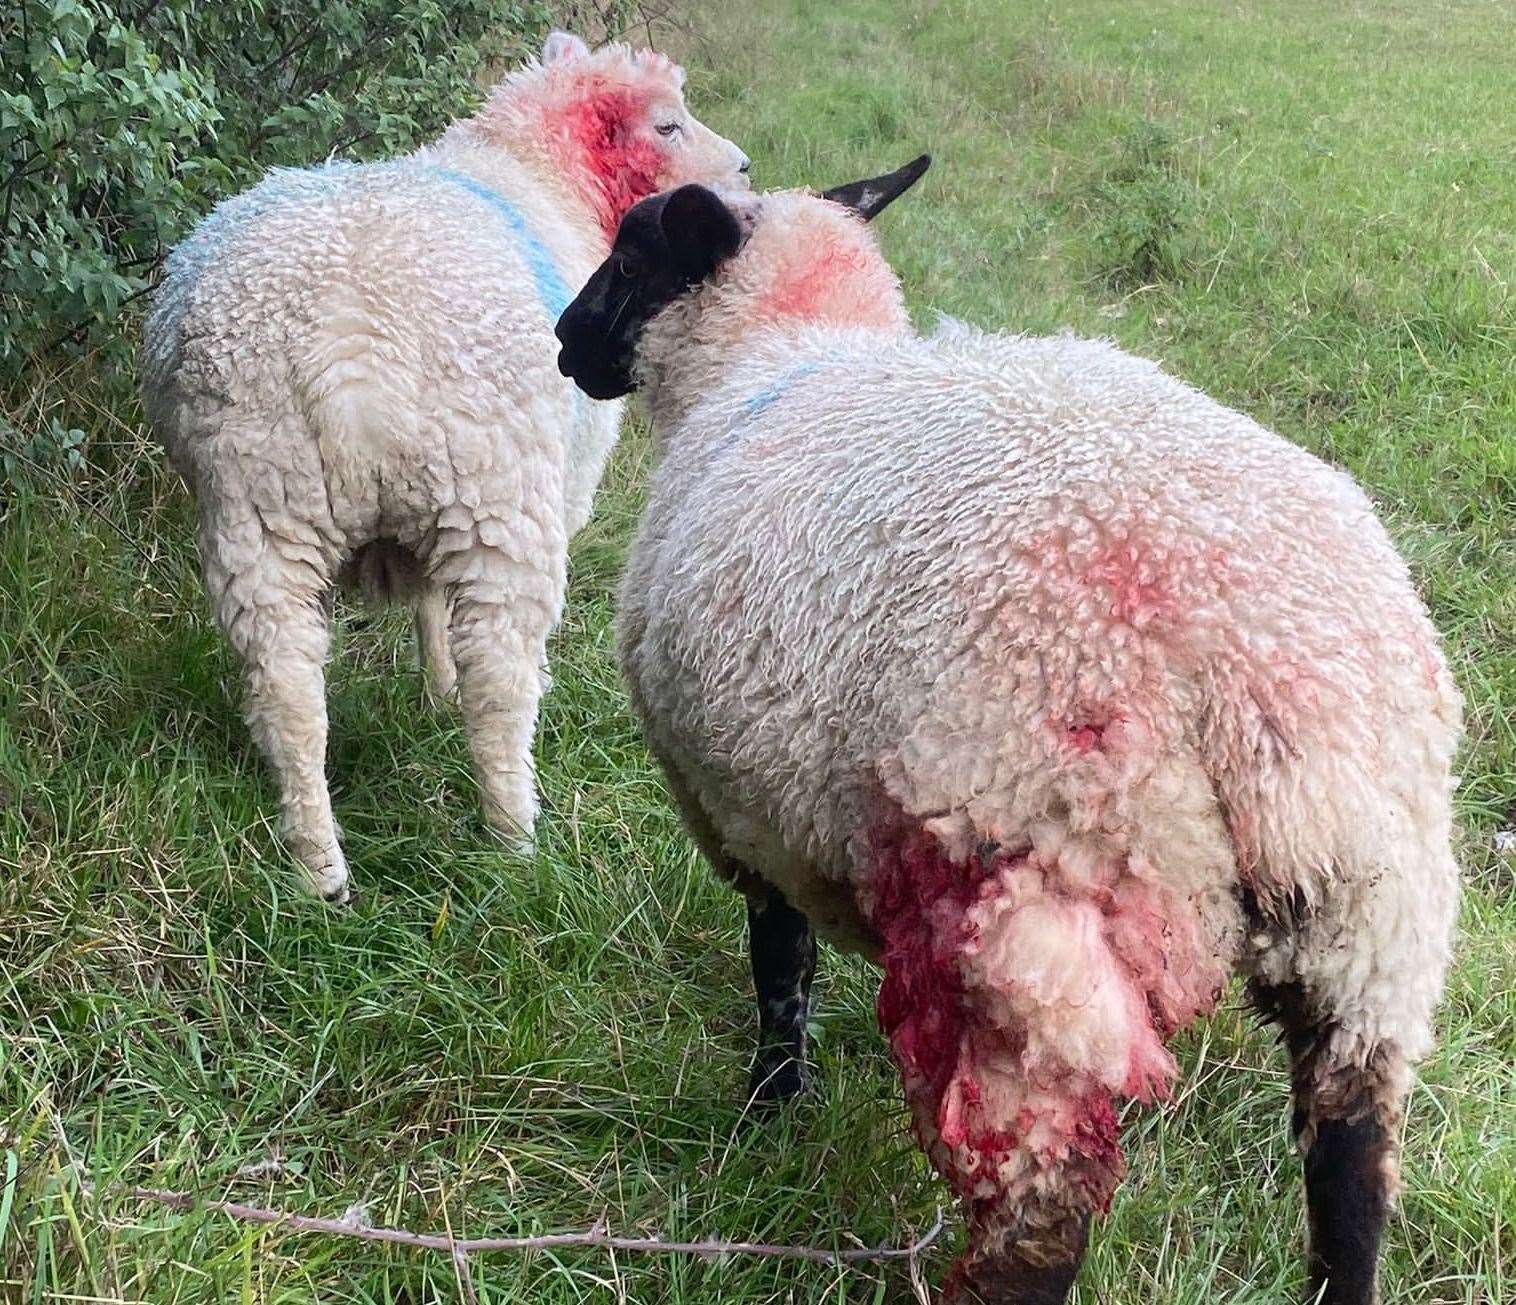 The farmer lost three of his sheep in the attack